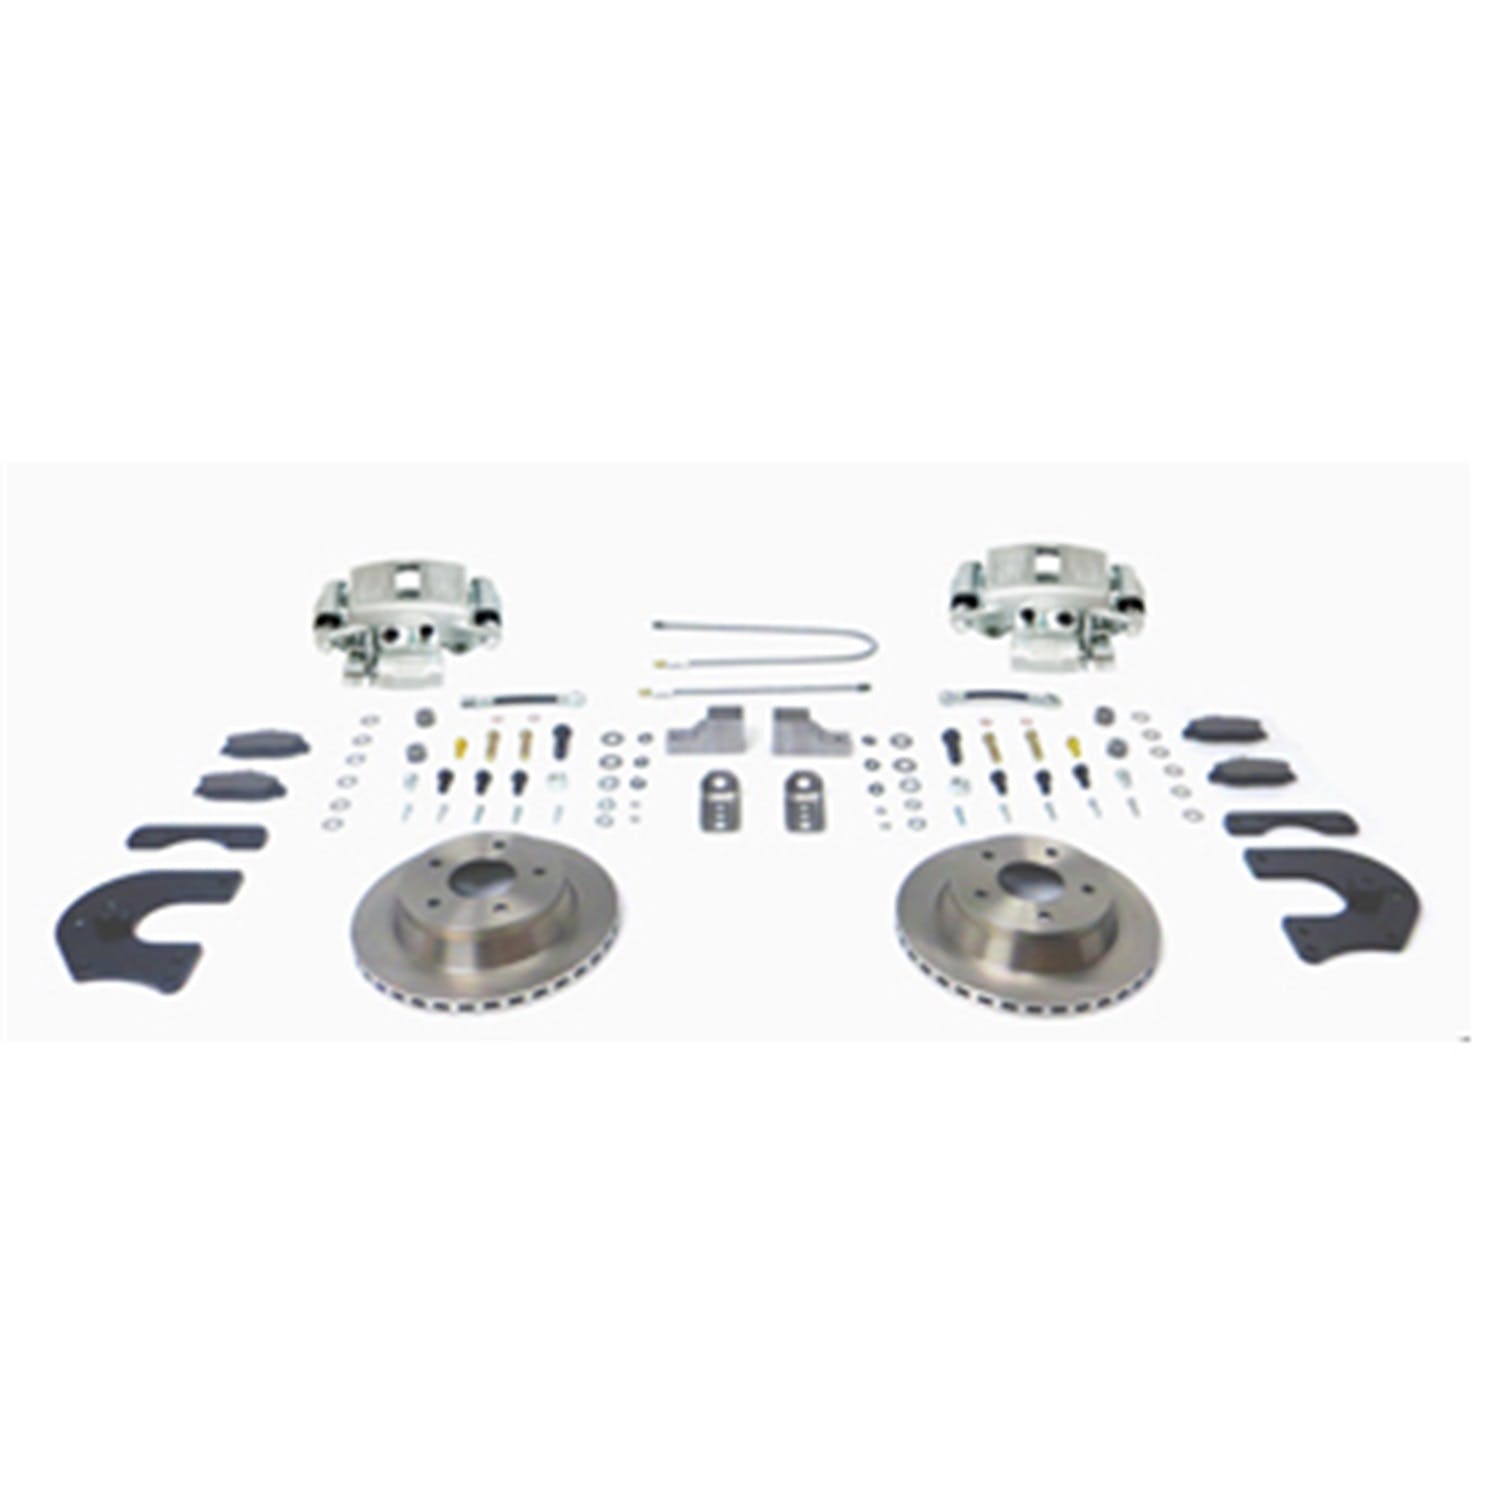 Stainless Steel Brakes A127R Kit A127 w/red calipers